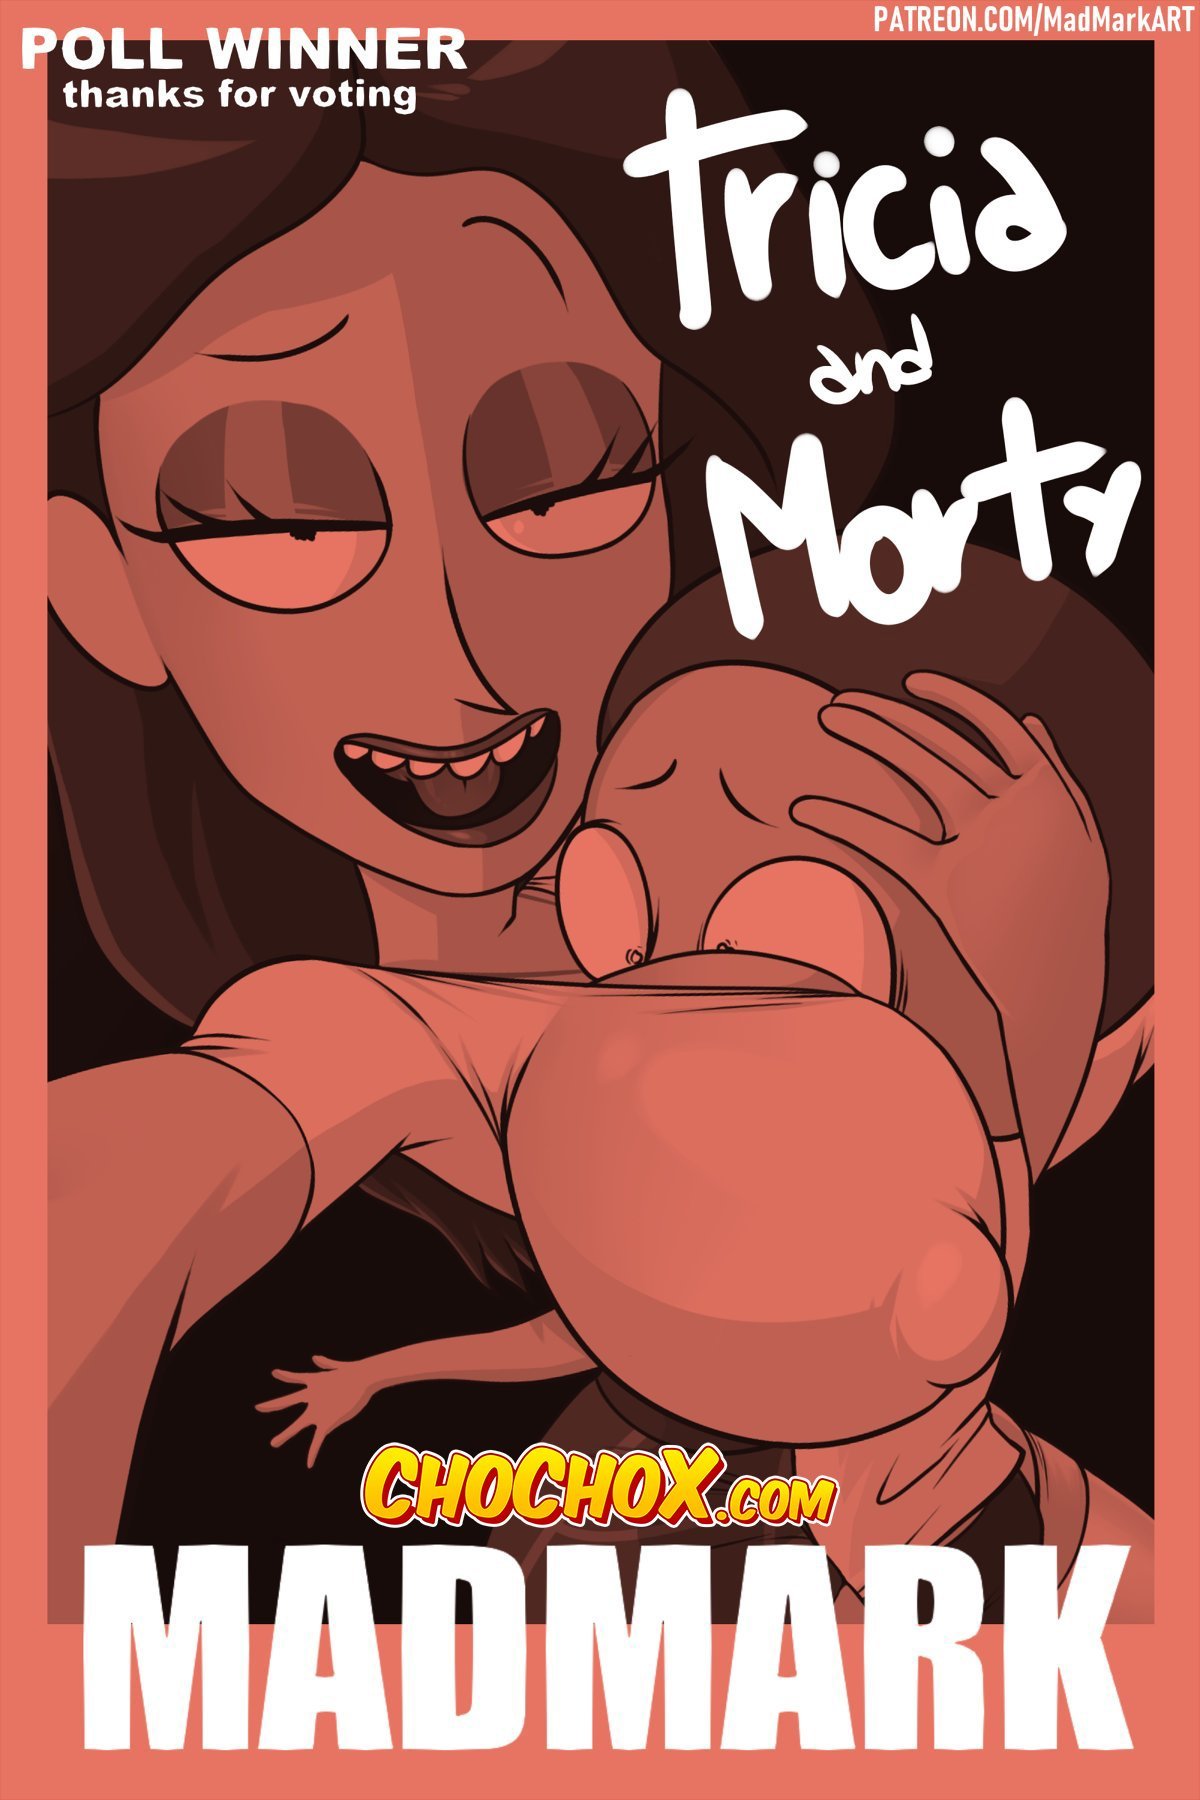 Tricia and Morty – MadMark - 0